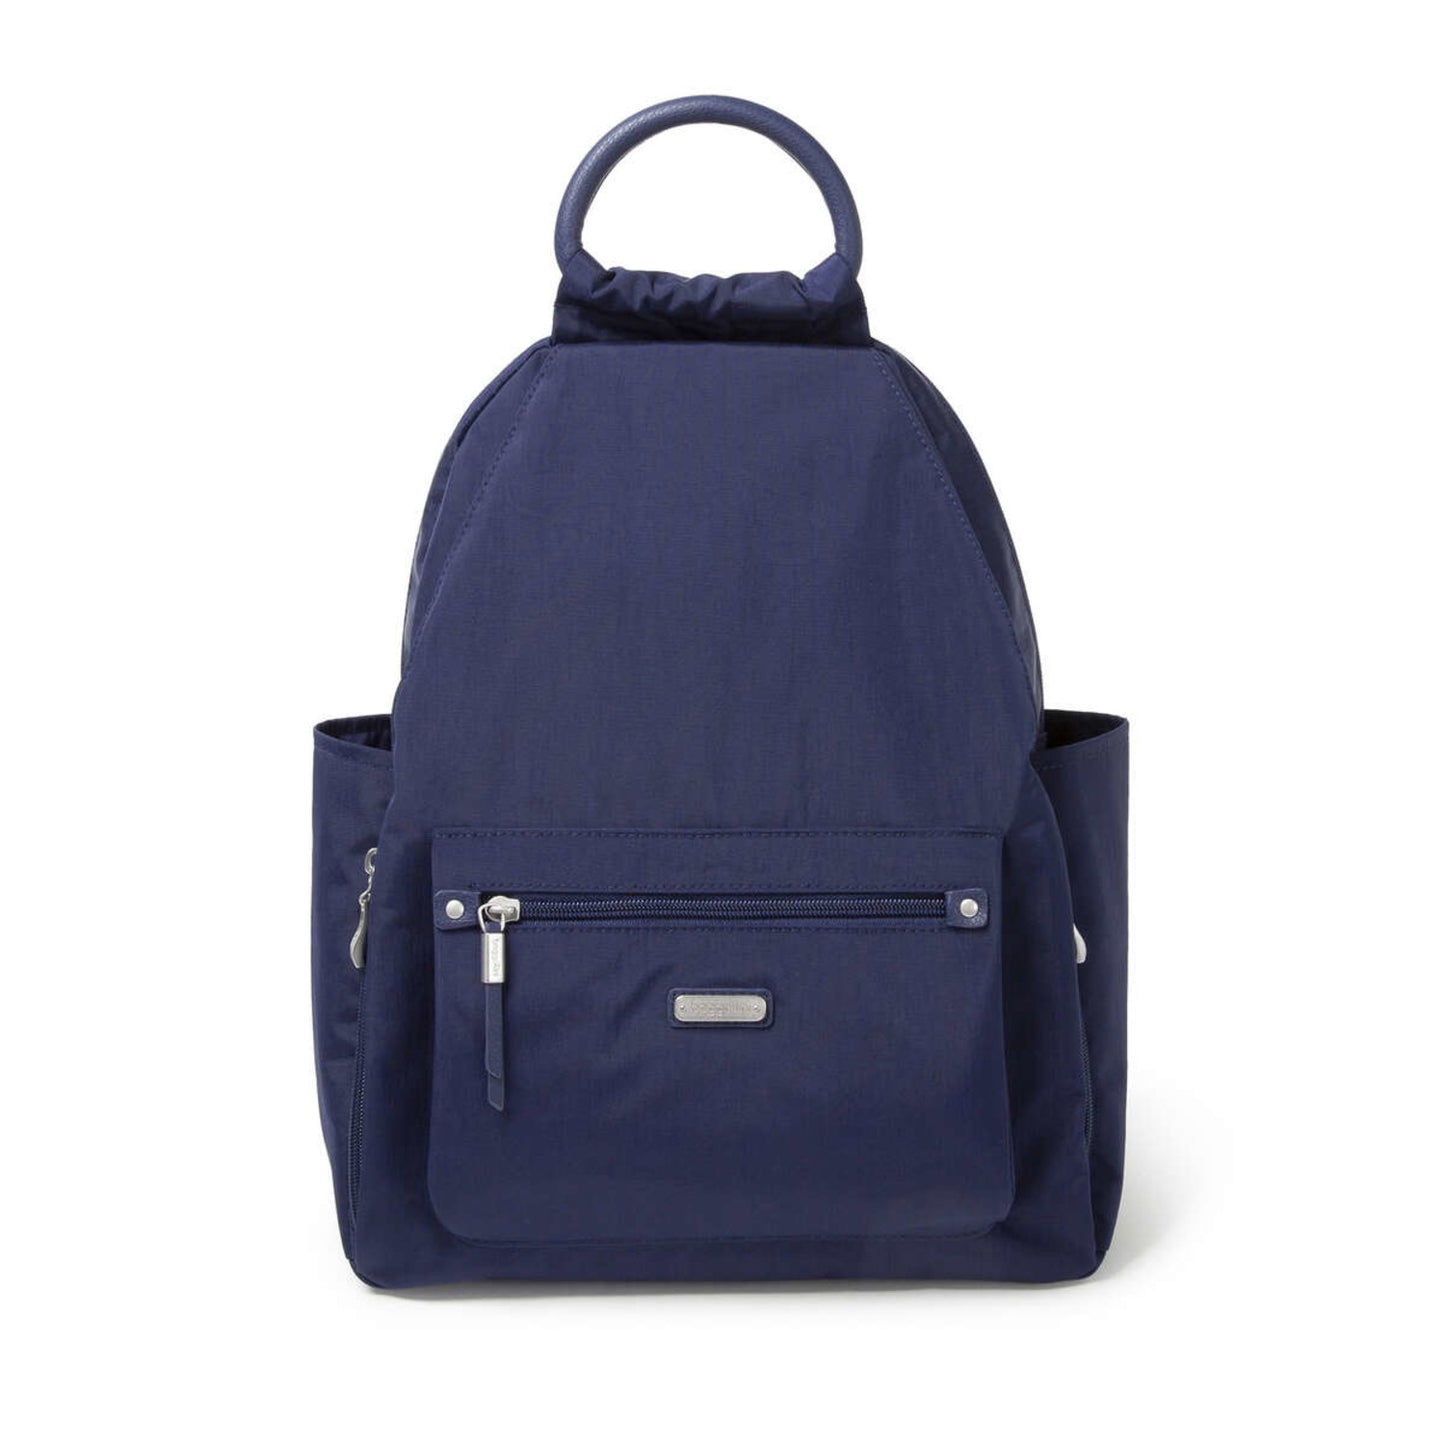 All Day Packpack Navy